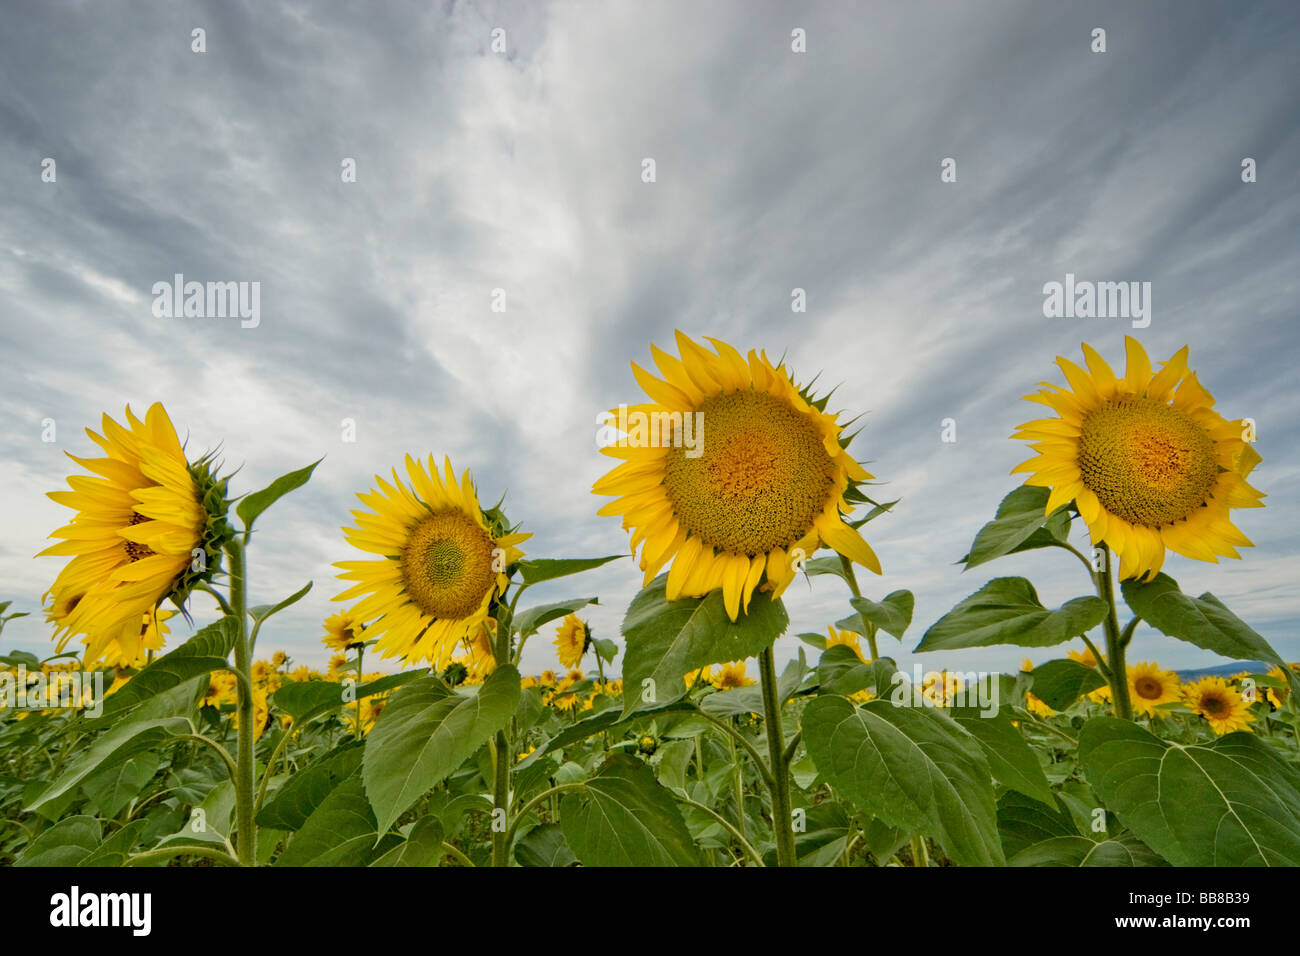 Sunflowers taken with a wide angle lens against the sky, Suedburgenland, Austria, Europe Stock Photo